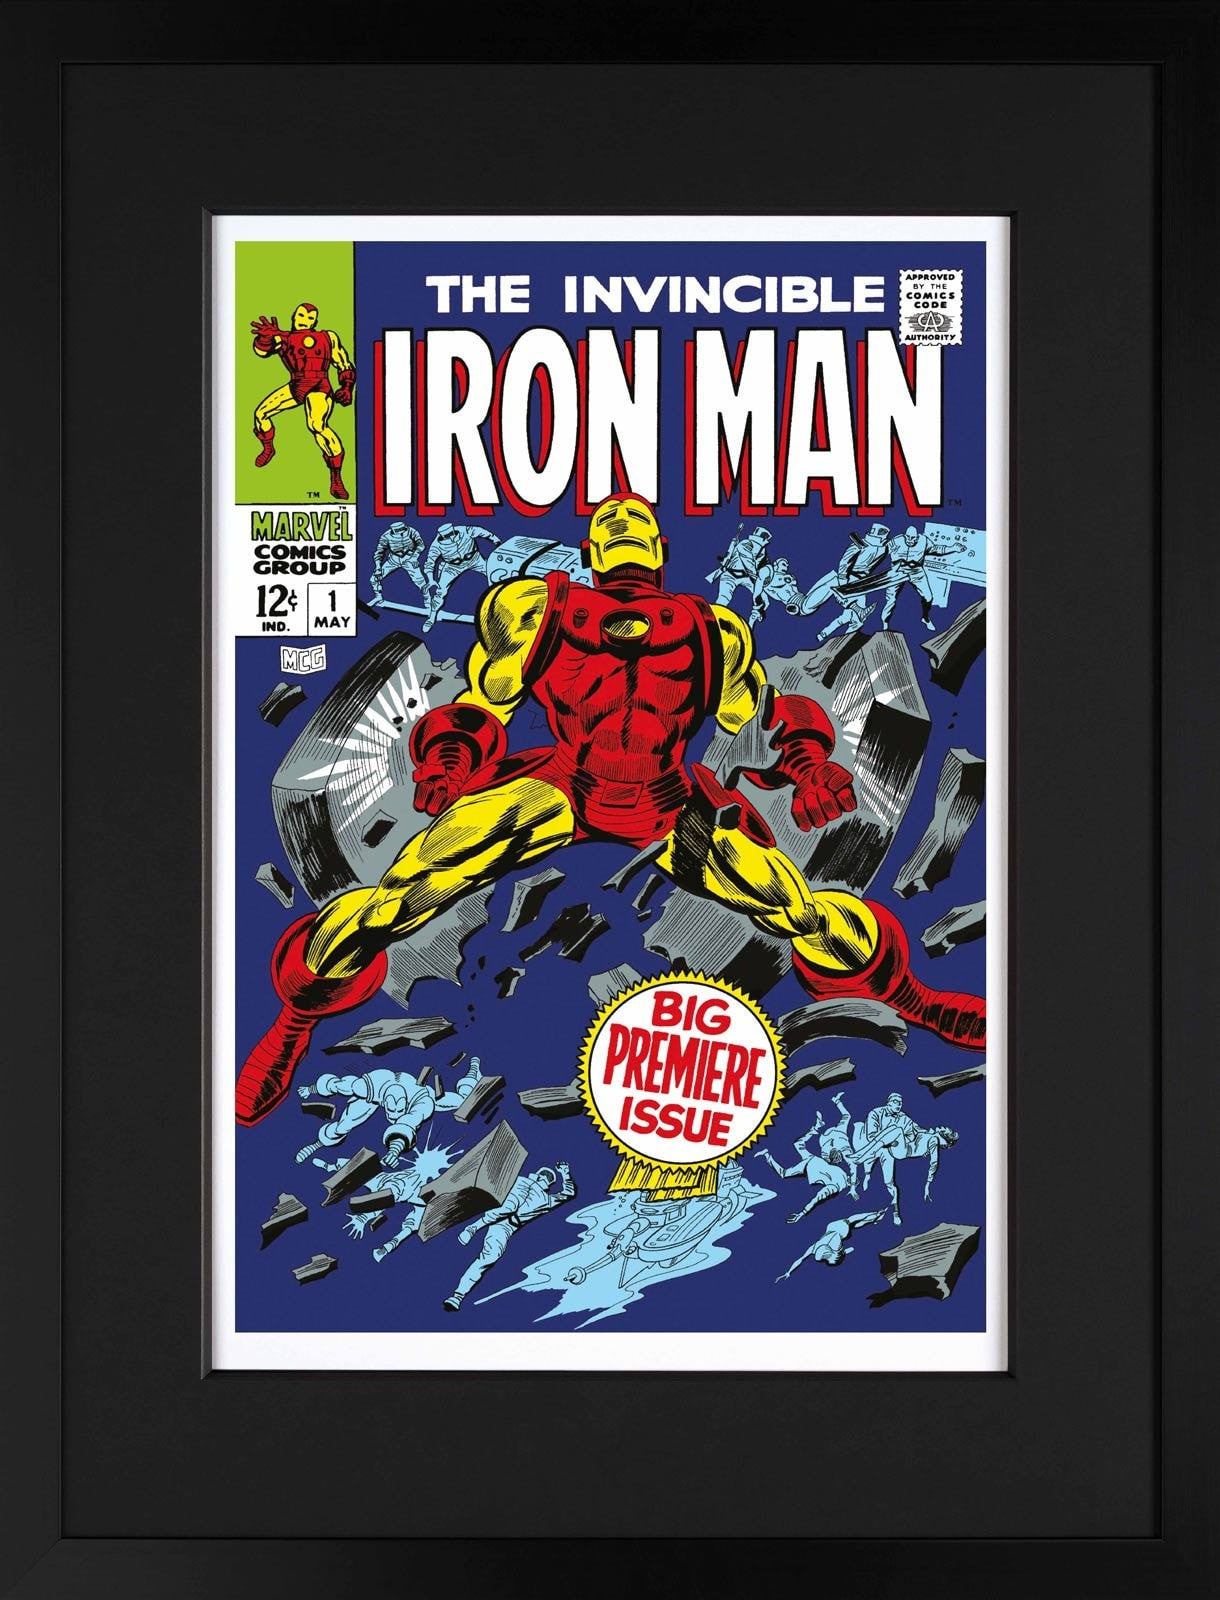 The Invincible Iron Man #1 - Big Premiere Issue Stan Lee